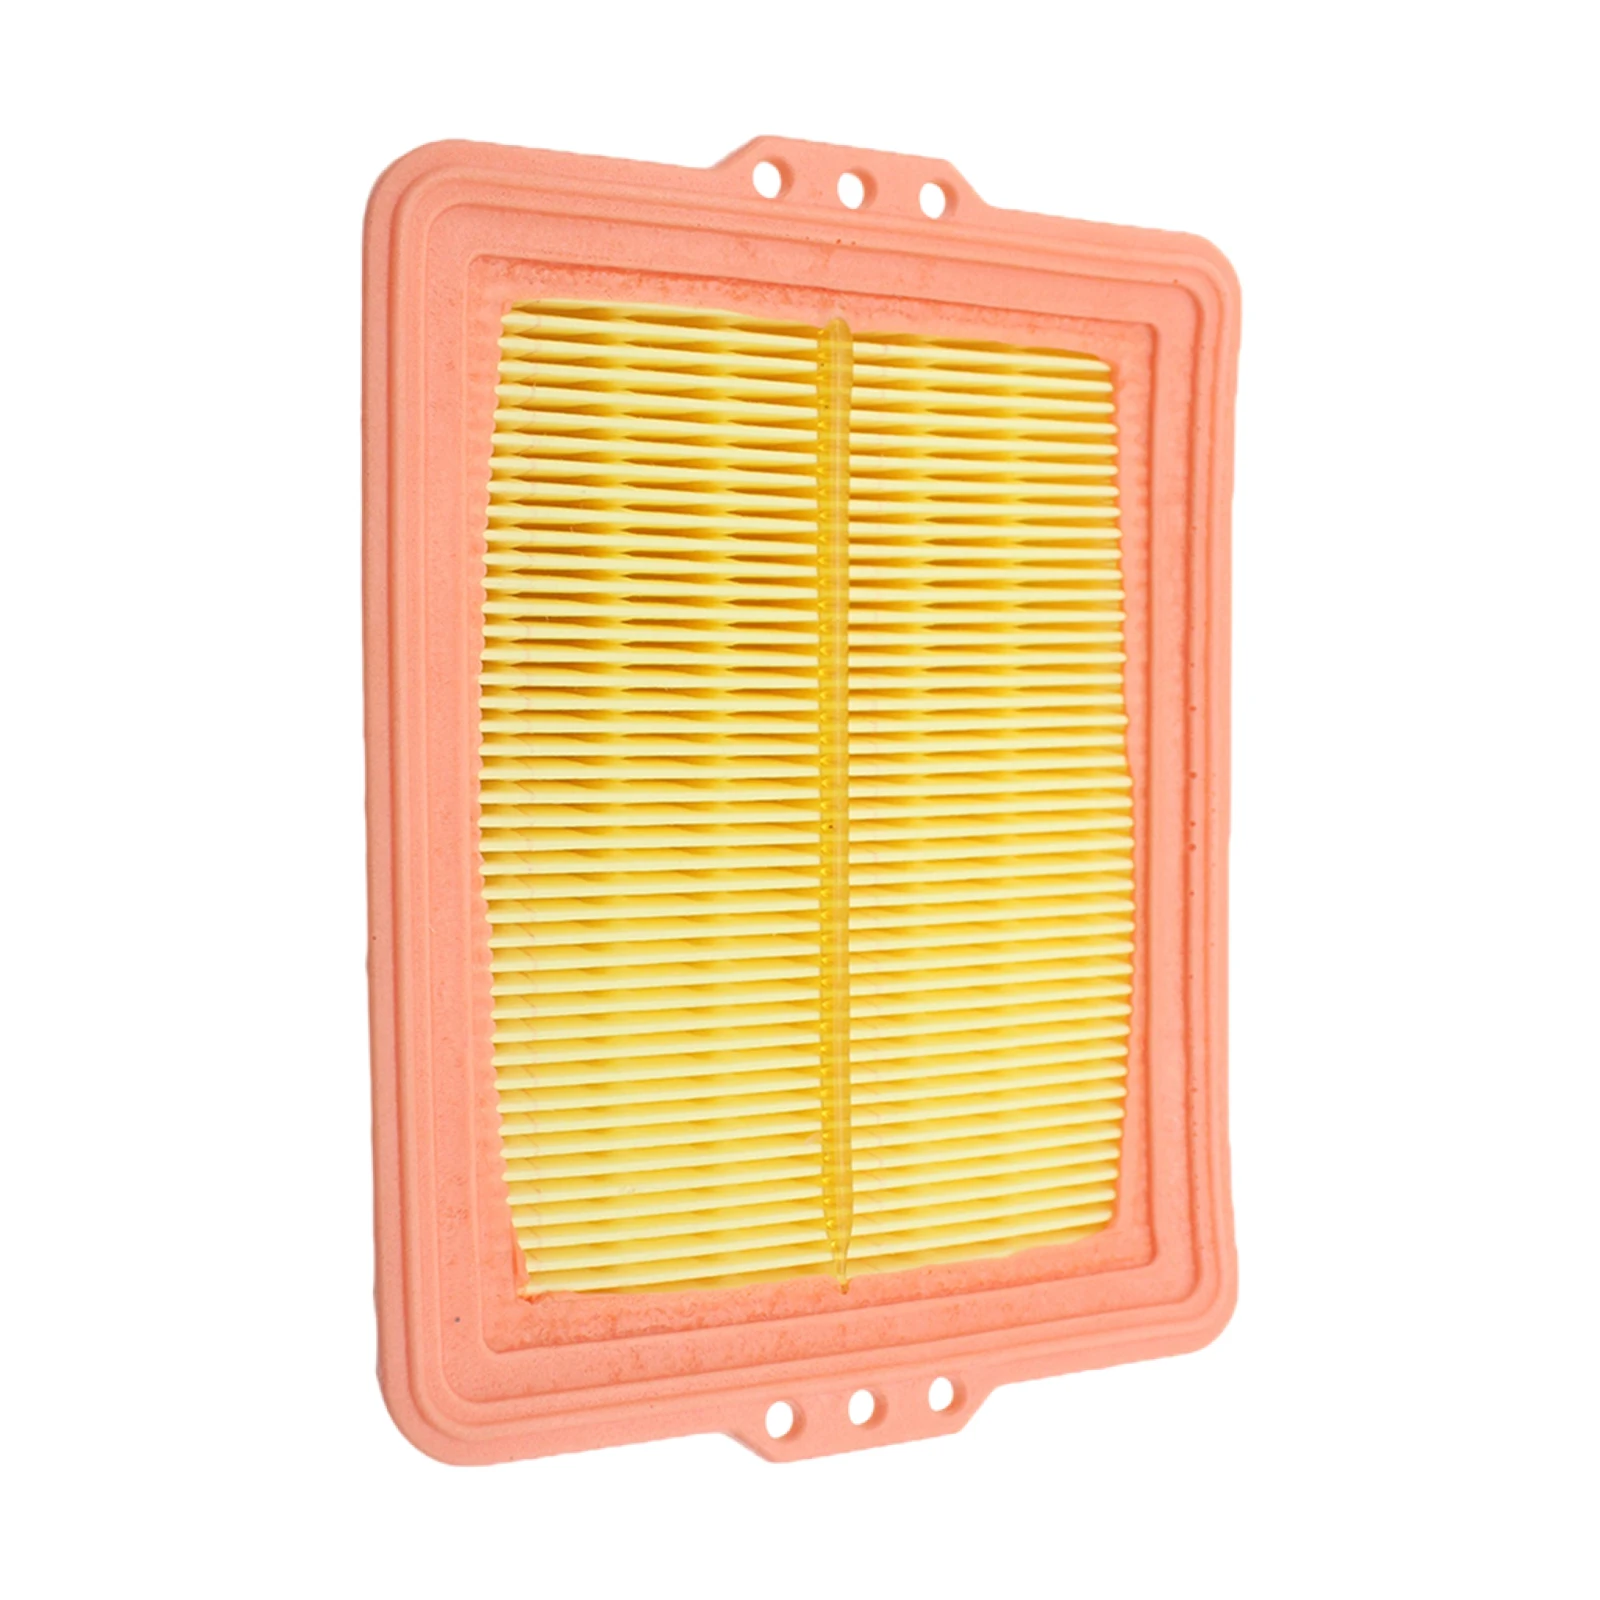 Air Filter Cleaner Durable Replacement Fits for GS F850GS 16-2021